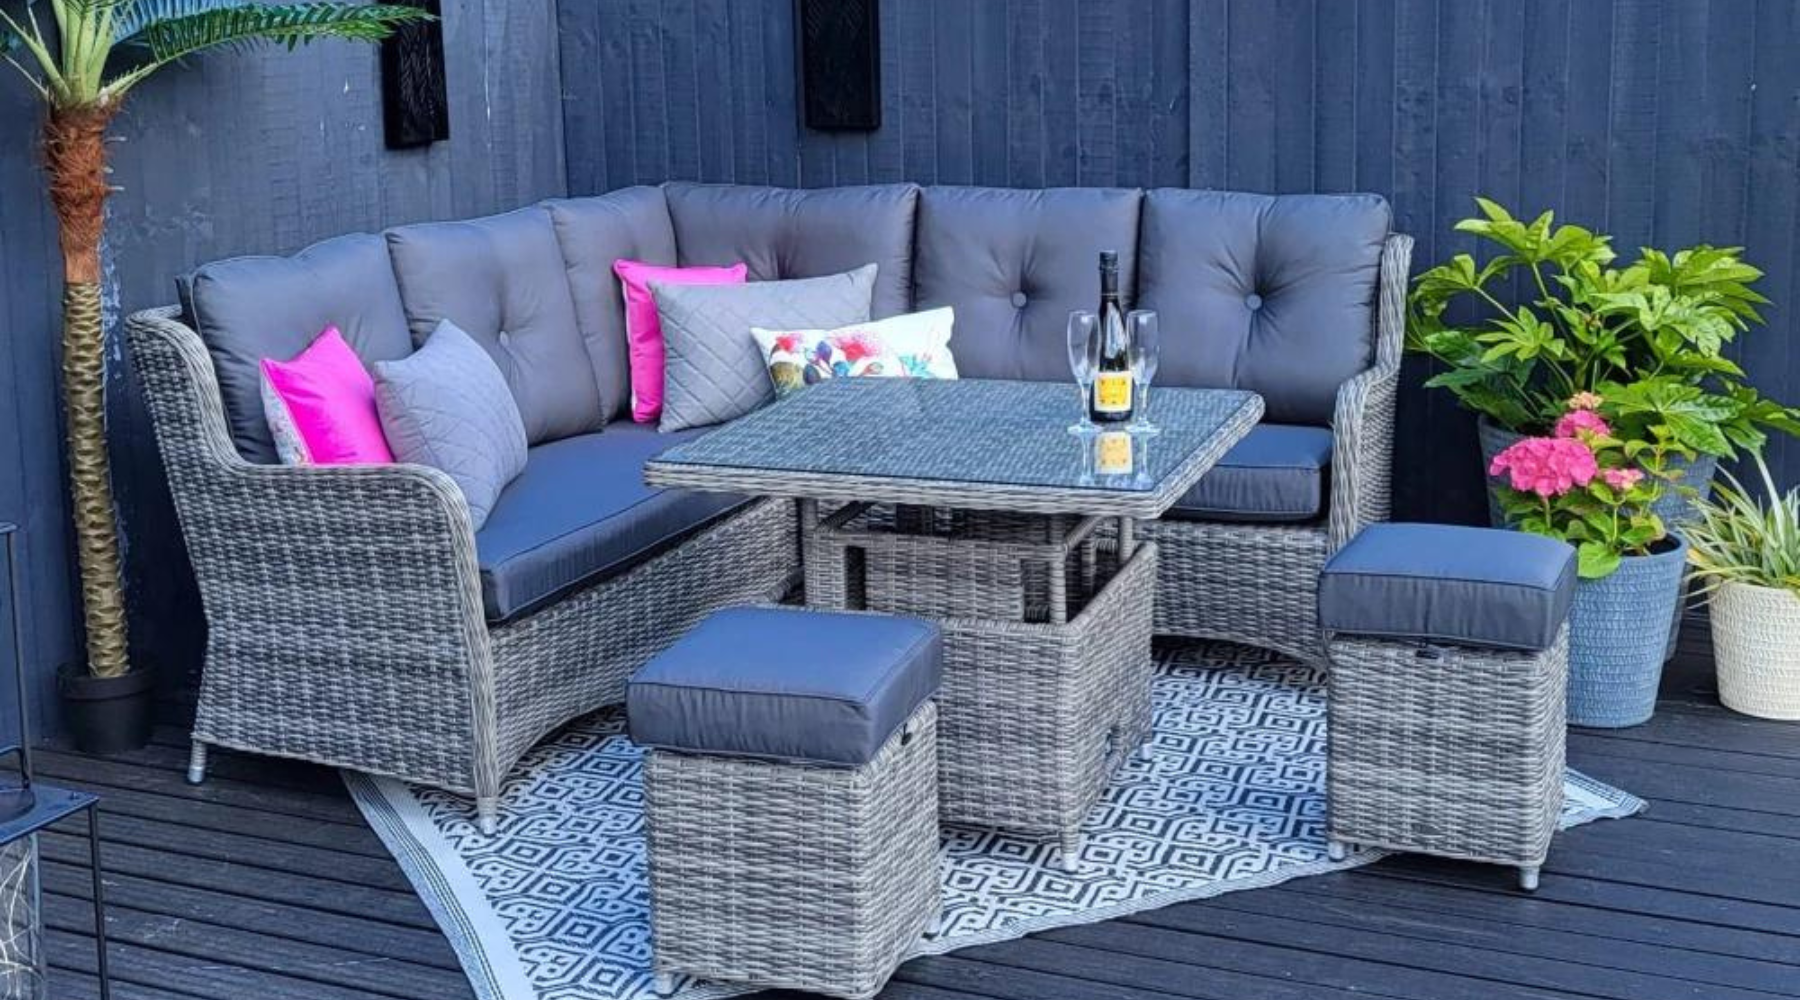 The Benefits of Compact Rattan Garden Furniture Sets